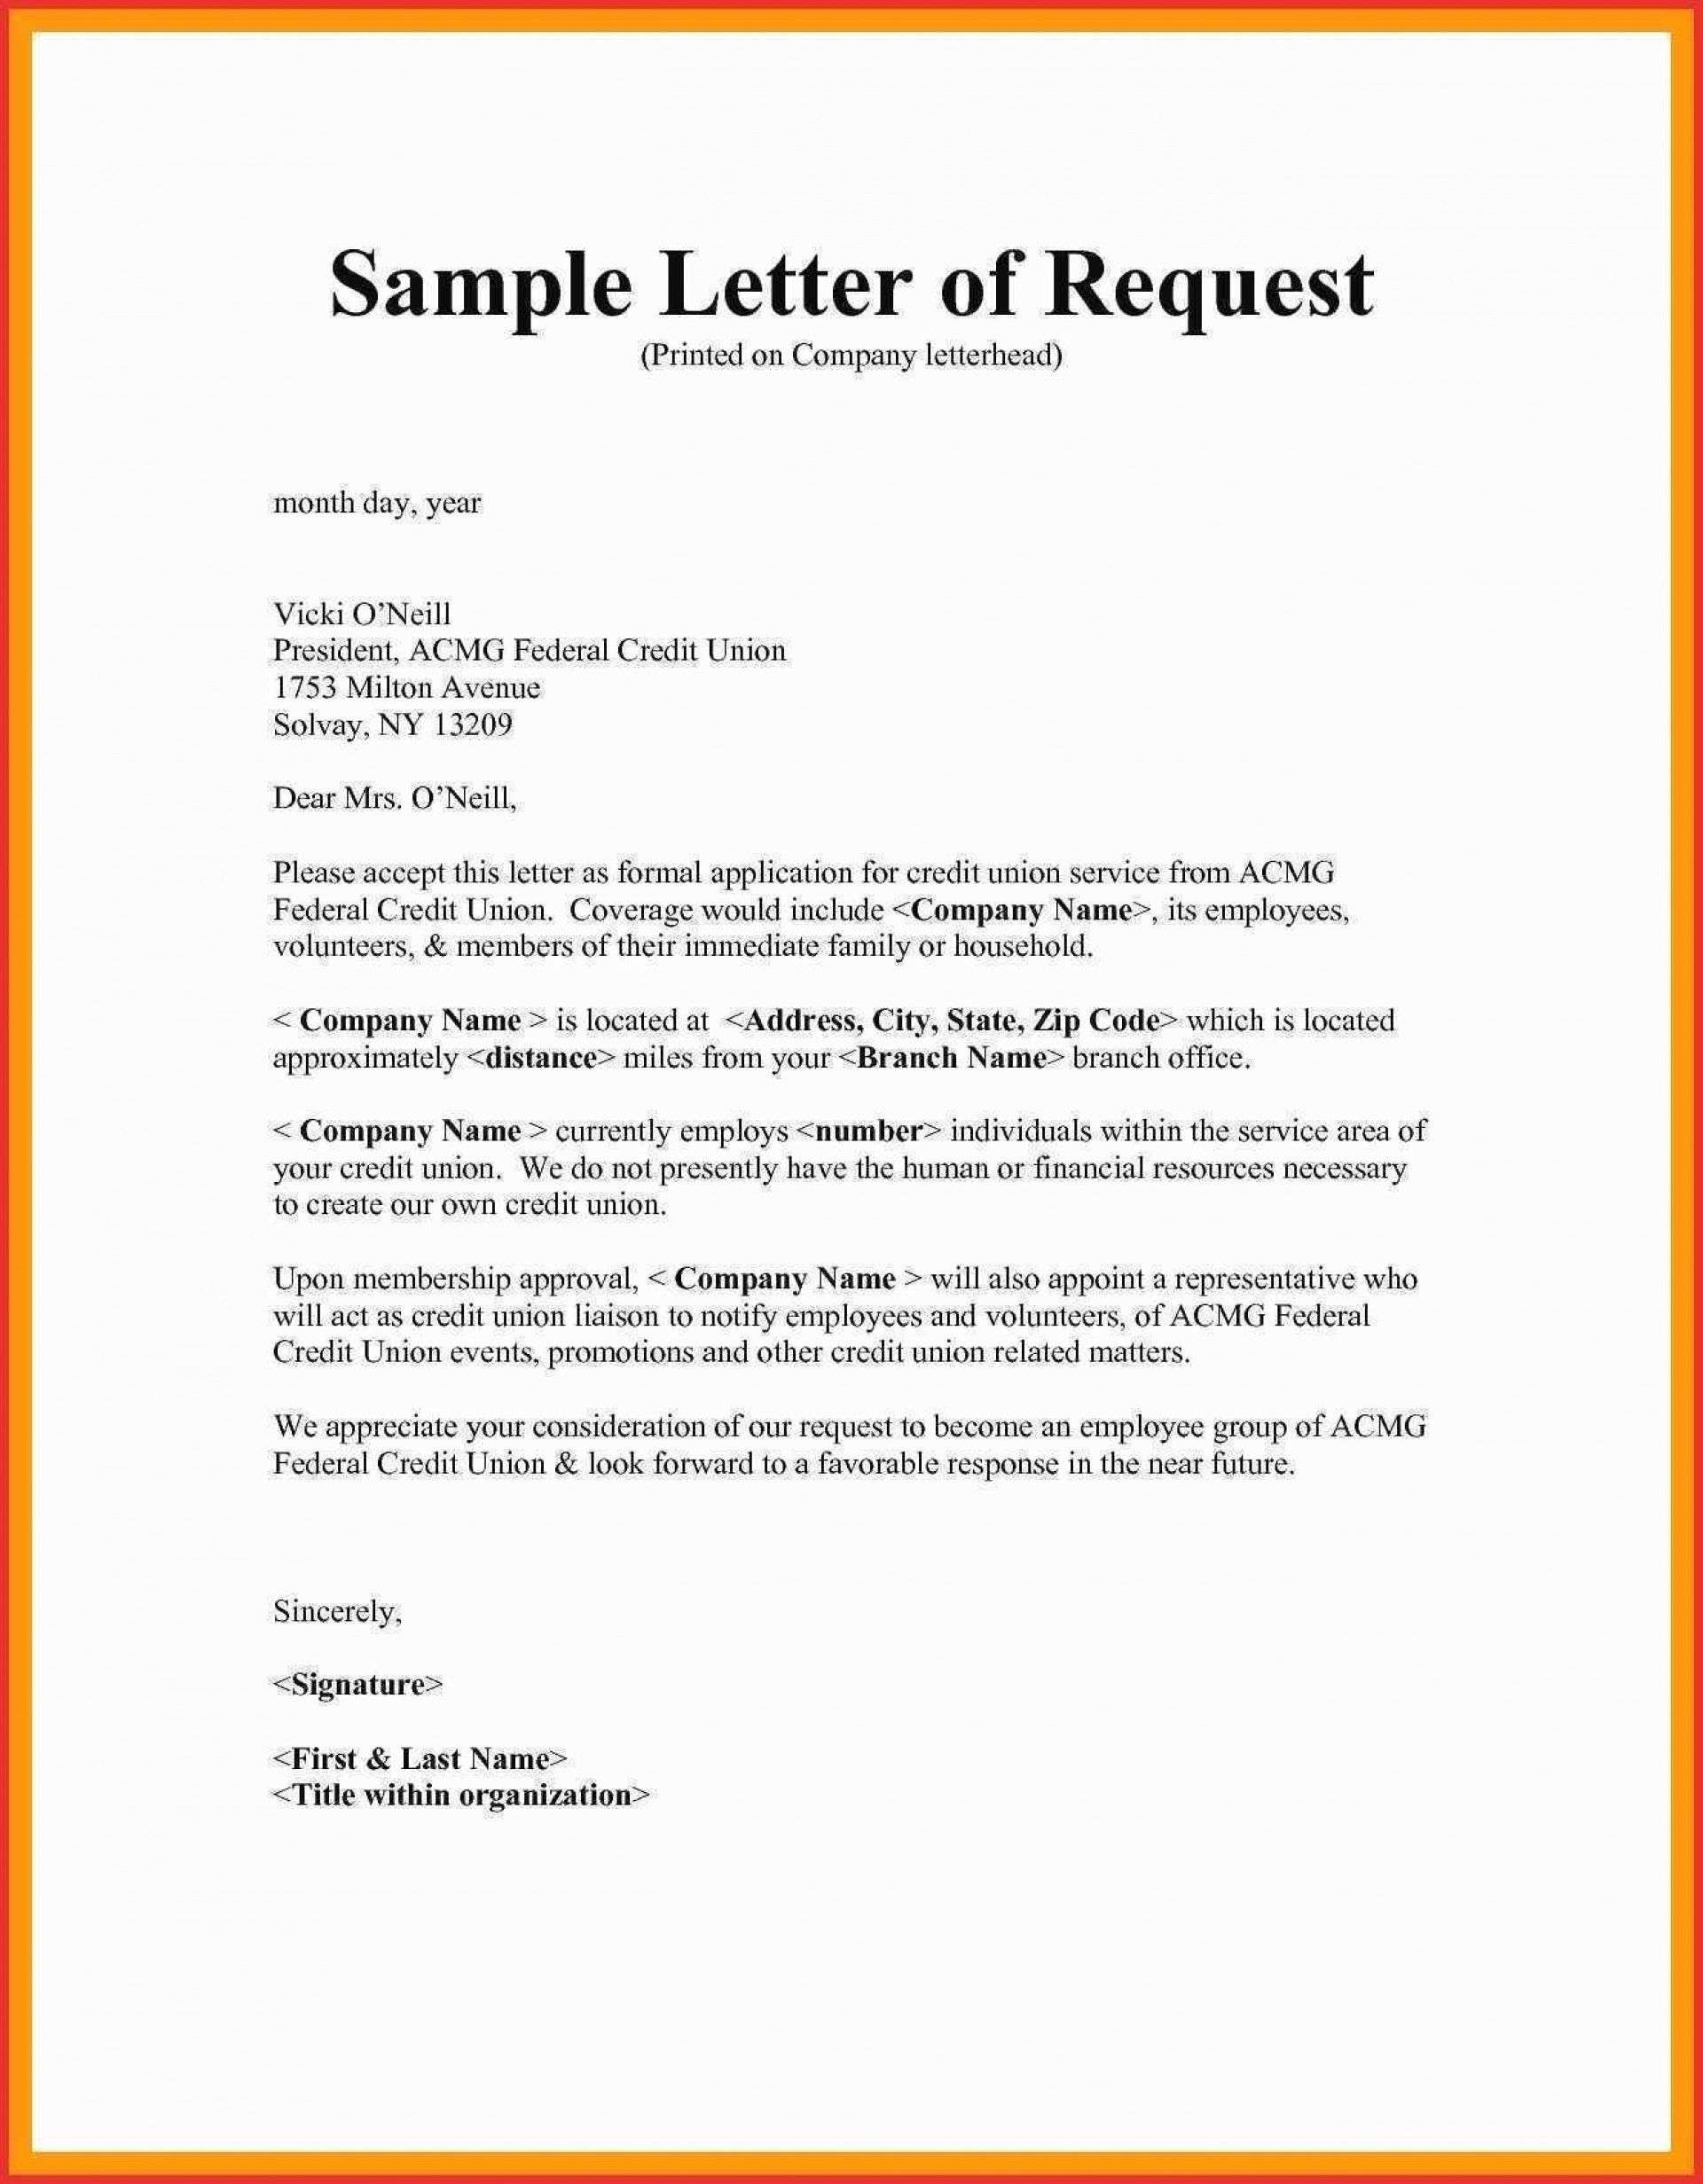 New Staff Salary Increase Recommendation Letter Salary pertaining to dimensions 1920 X 2463